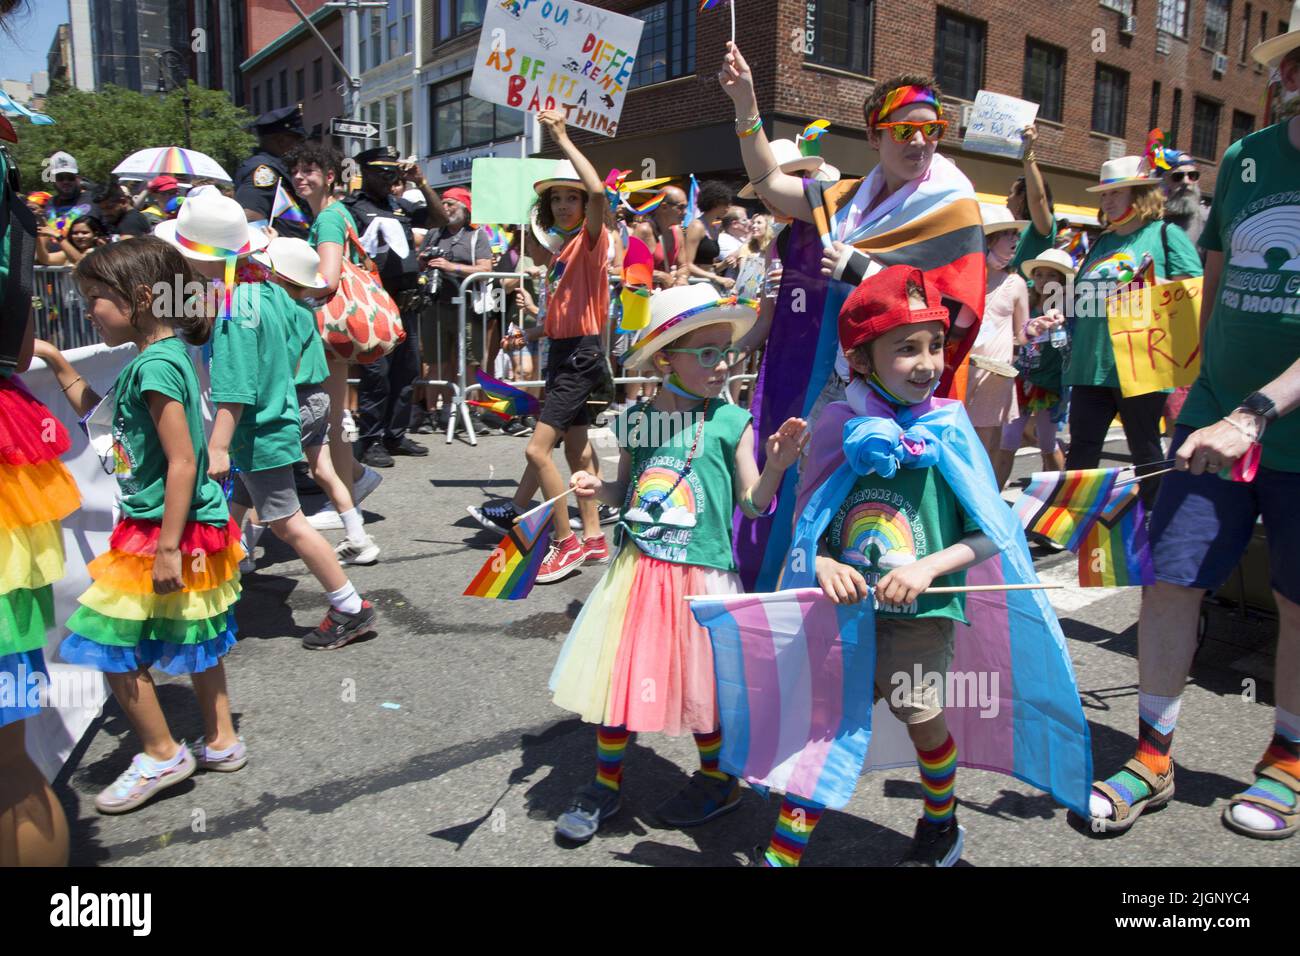 The annual Gay Pride Parade returns to march down 5th Avenue  and end up on Christopher Street in Greenwich Village after a 3 year break due to the Covid-19 pandemic.  PS 20 shows its support of the LGBTQ community. Stock Photo